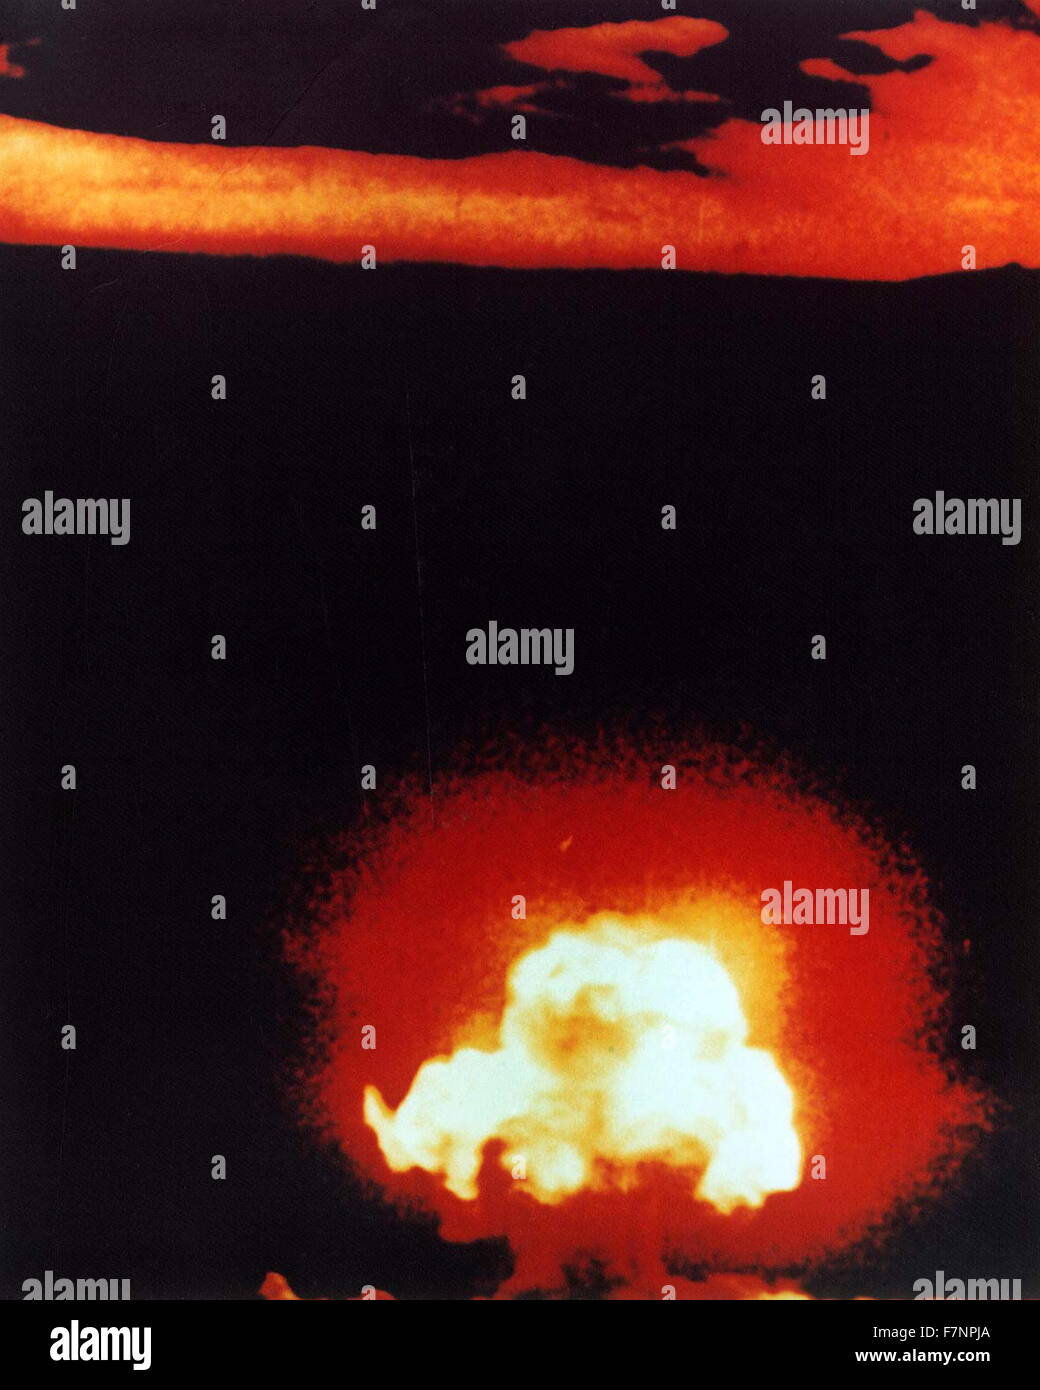 Atomic bomb 'Gadget' exploding during Operation Trinity, 16 Jul 1945. This was the final test in Nevada before the atomic bombs were exploded at Hiroshima and Nagasaki in World War two. Stock Photo